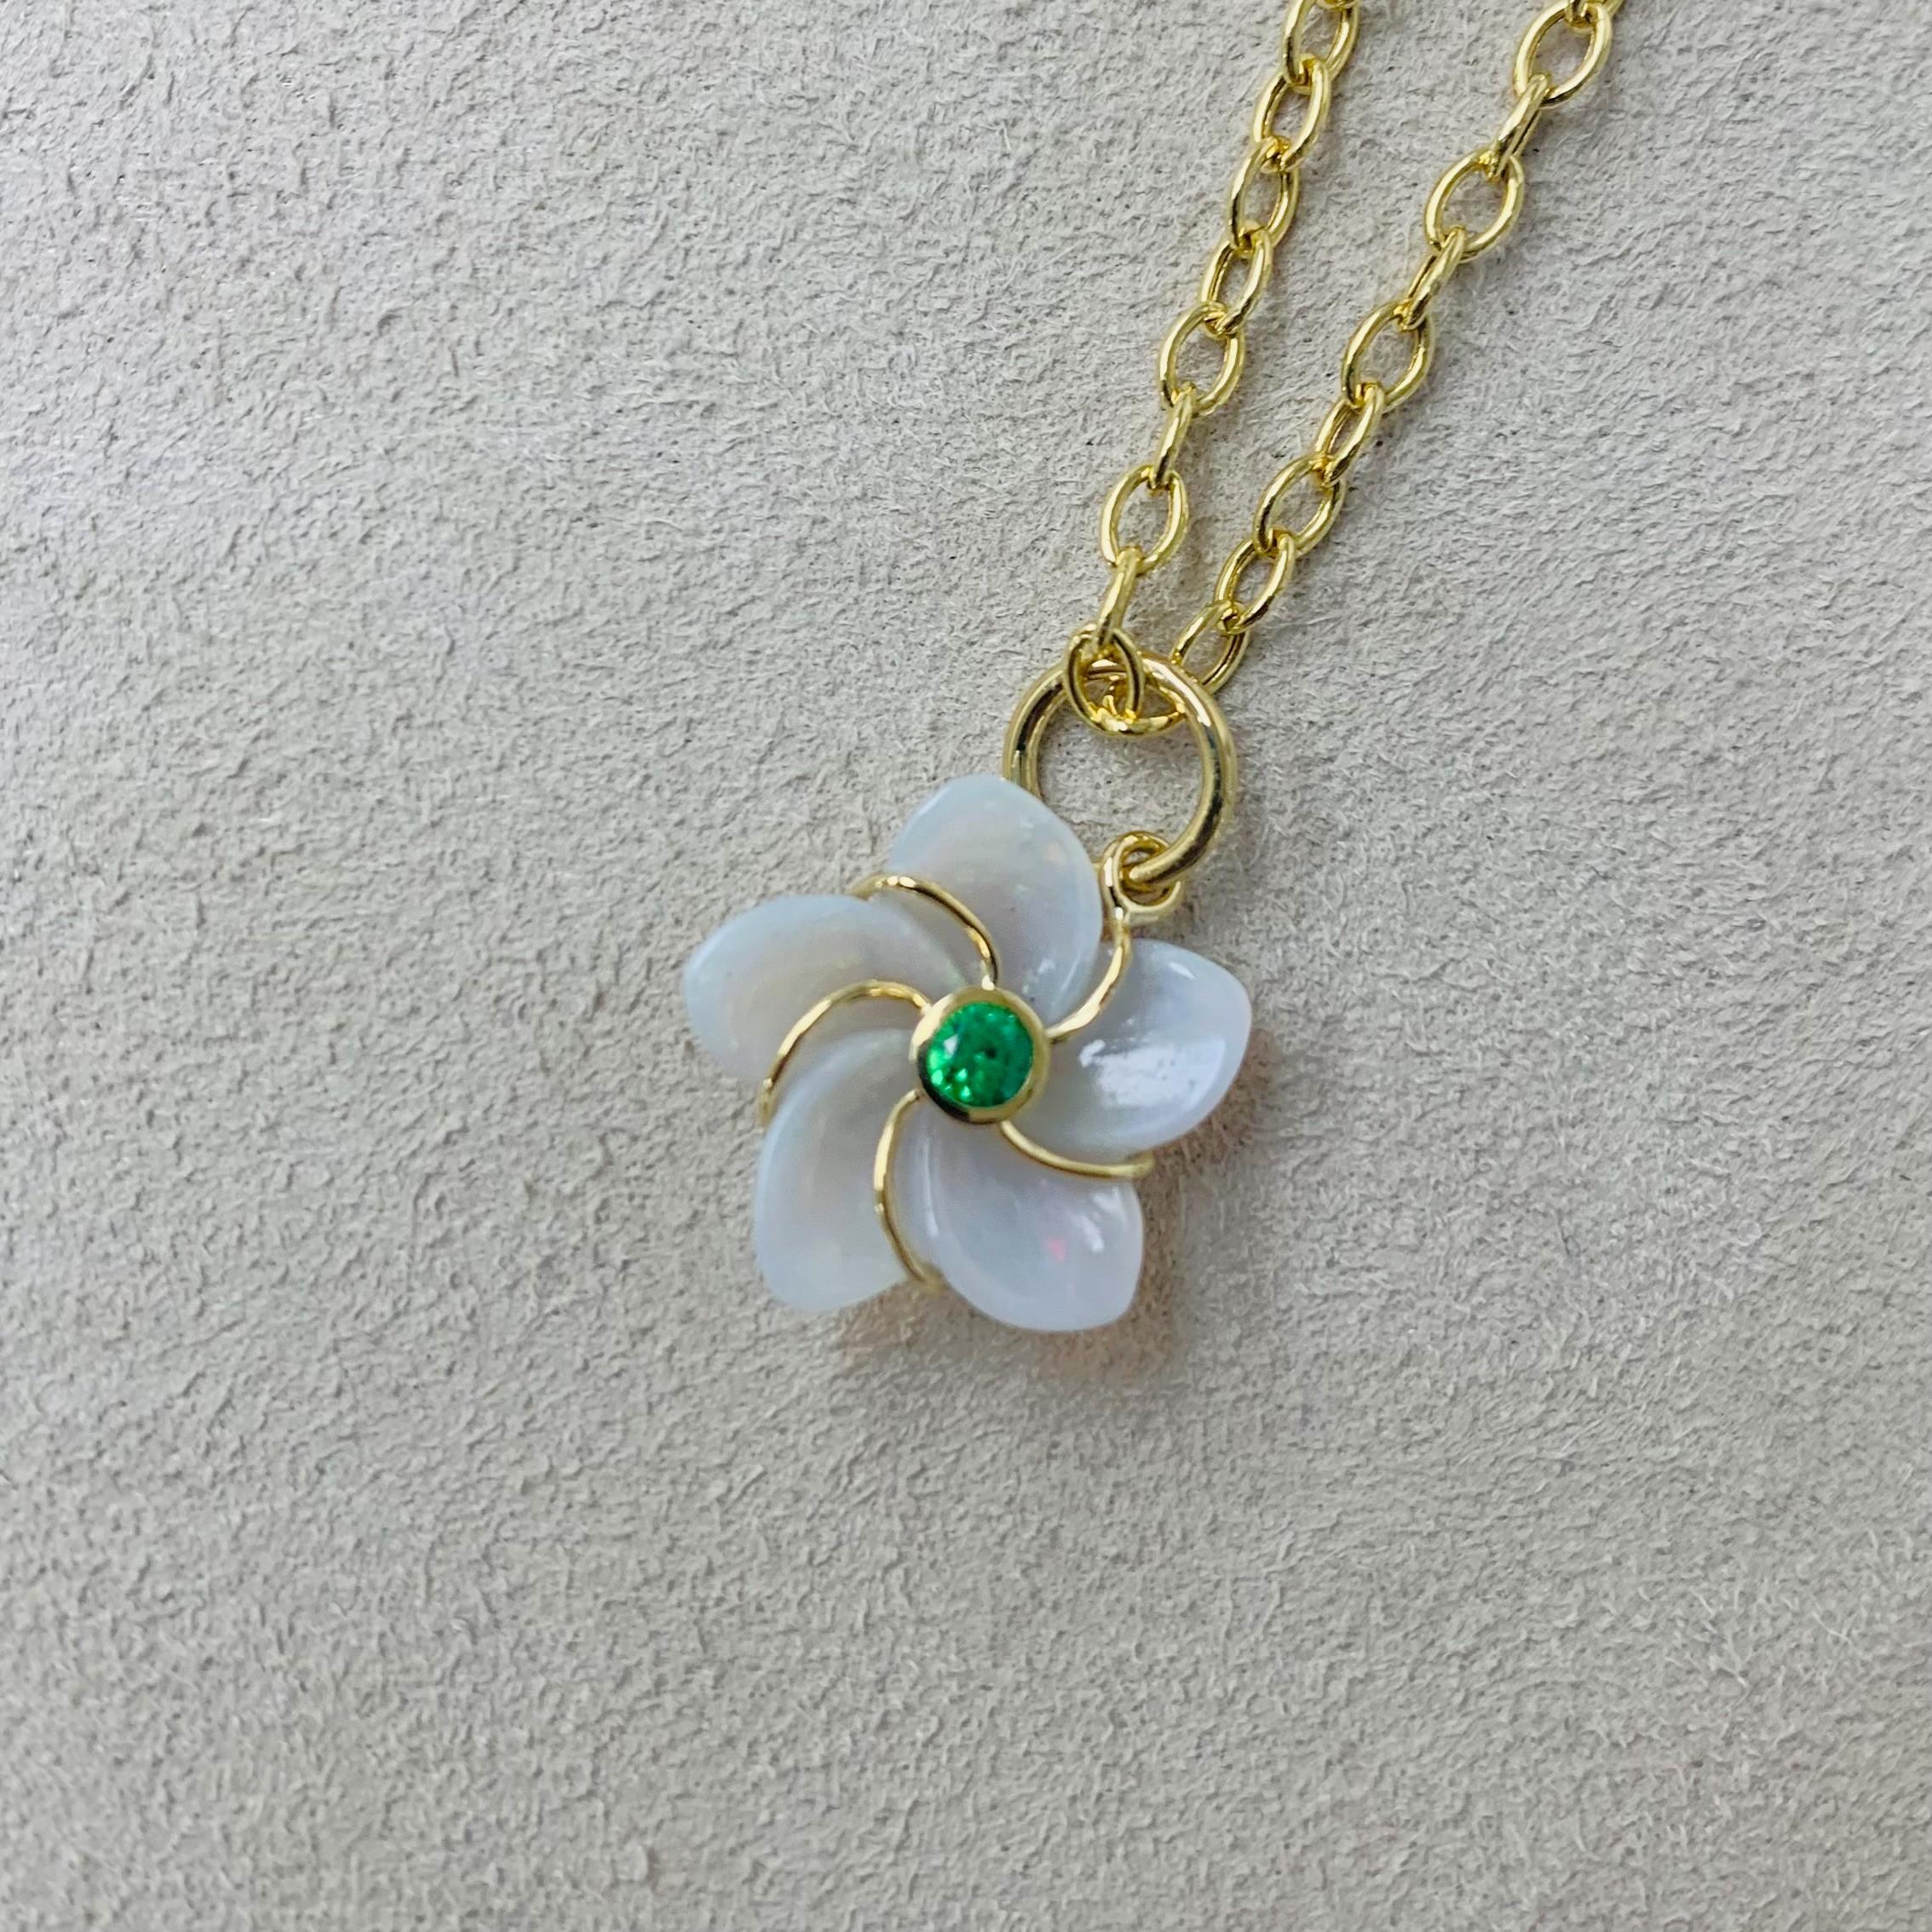 Created in 18 karat yellow gold
Opal 4.20 carats approx.
Tsavorite 0.10 carat approx.
Limited edition
Chain sold separately


 About the Designers ~ Dharmesh & Namrata

Drawing inspiration from little things, Dharmesh & Namrata Kothari have created